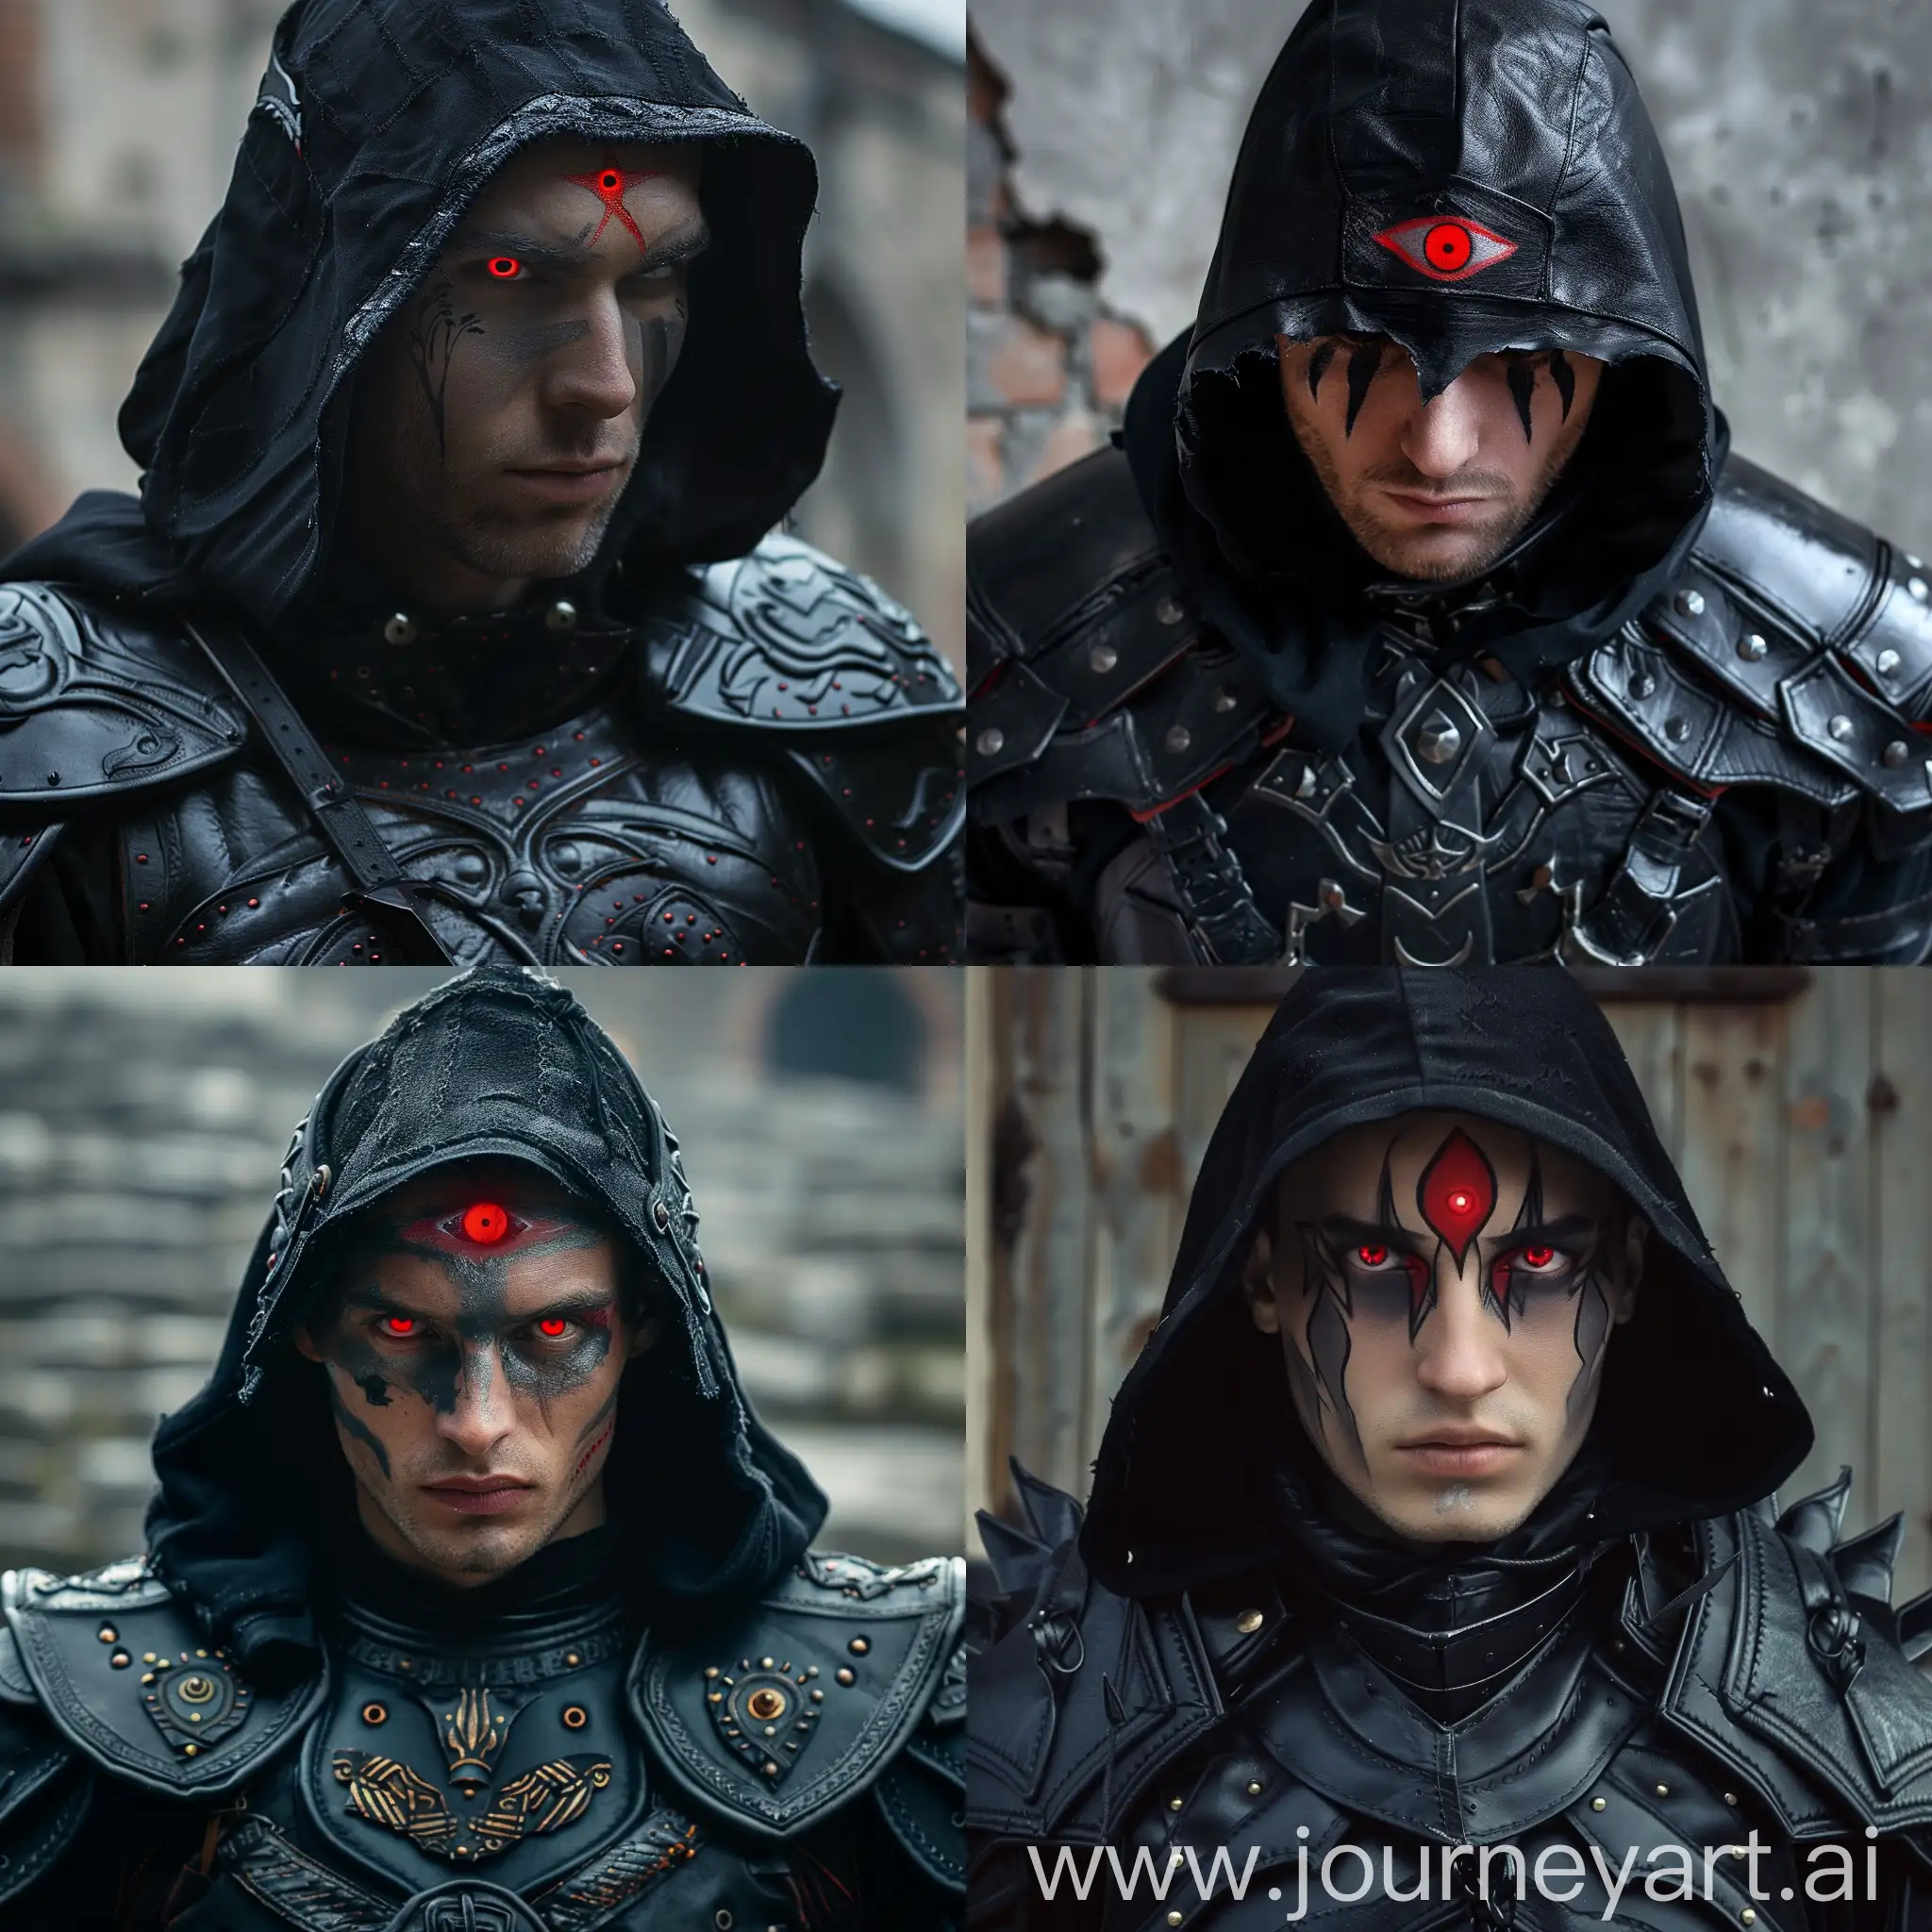 The guy with the red eye painted on his forehead, black leather armor with painted red eyes, black hood